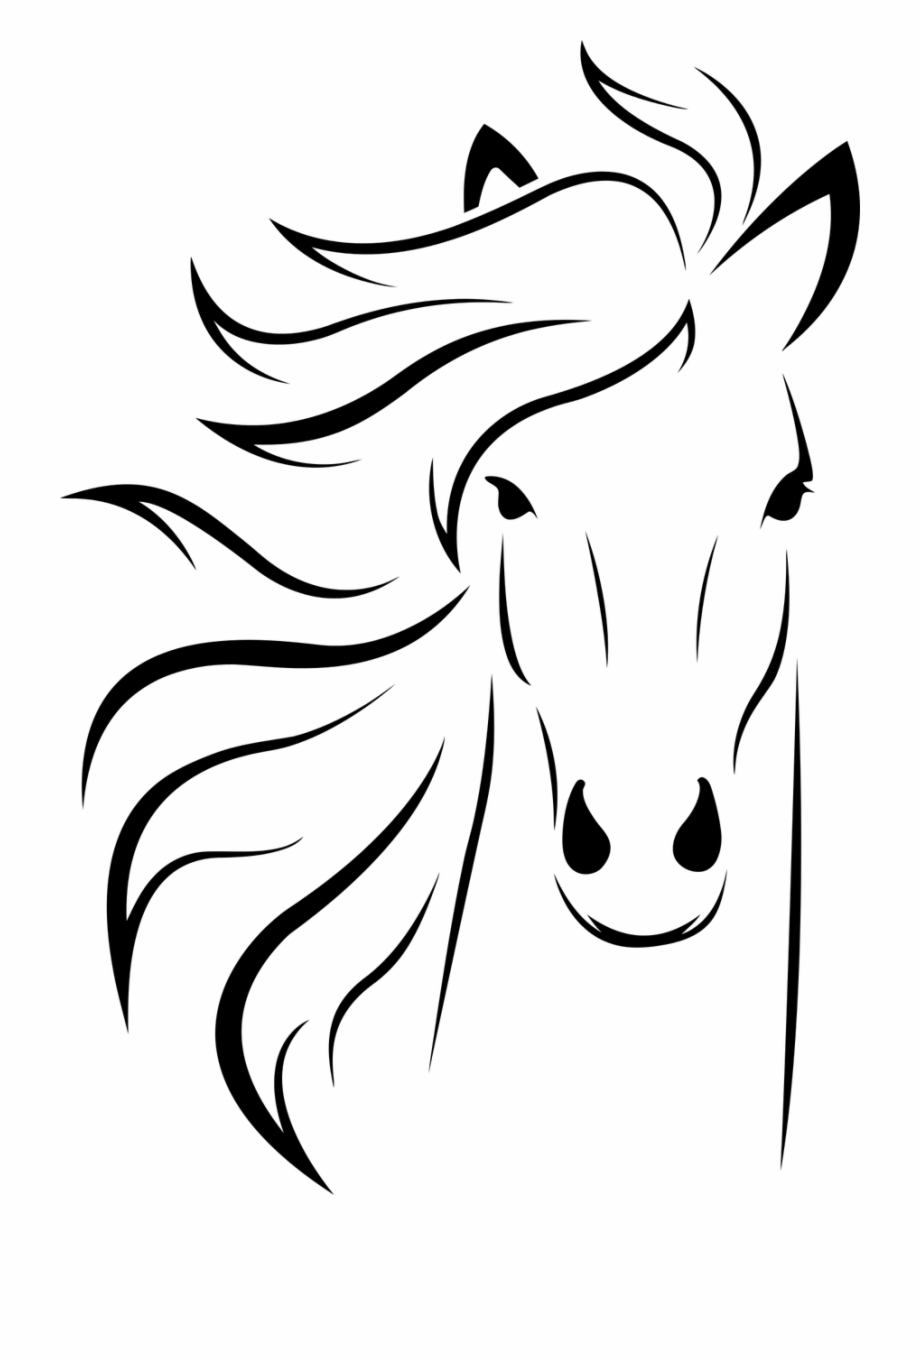 drawing of a horse face
